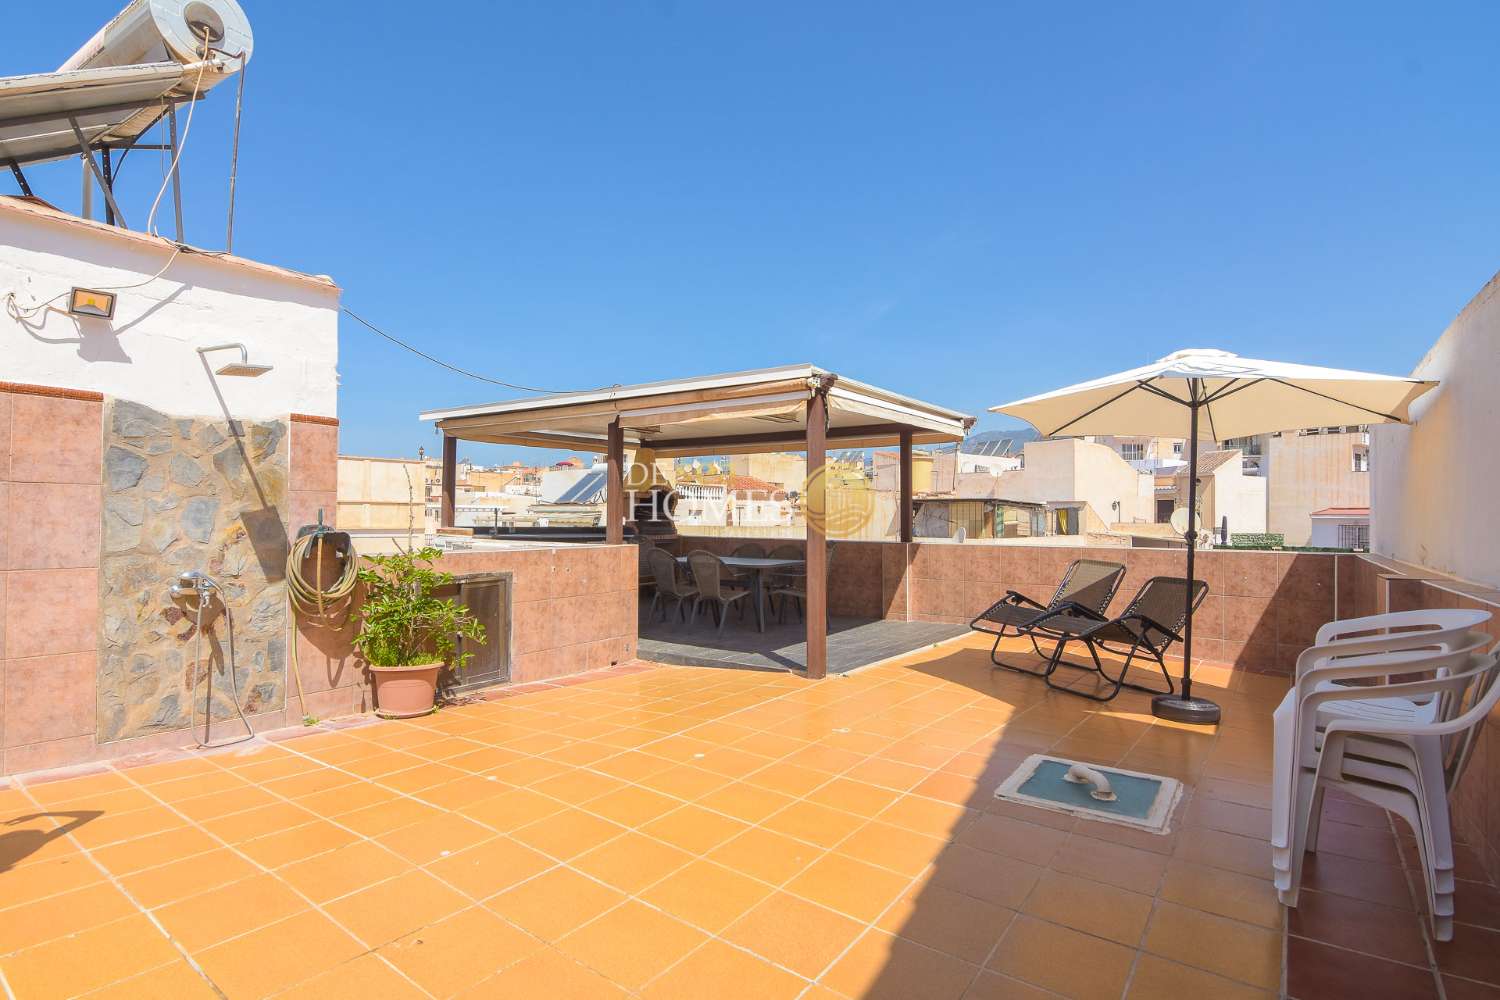 Spacious apartment with 4 bedrooms and a private terrace in the center of Nerja